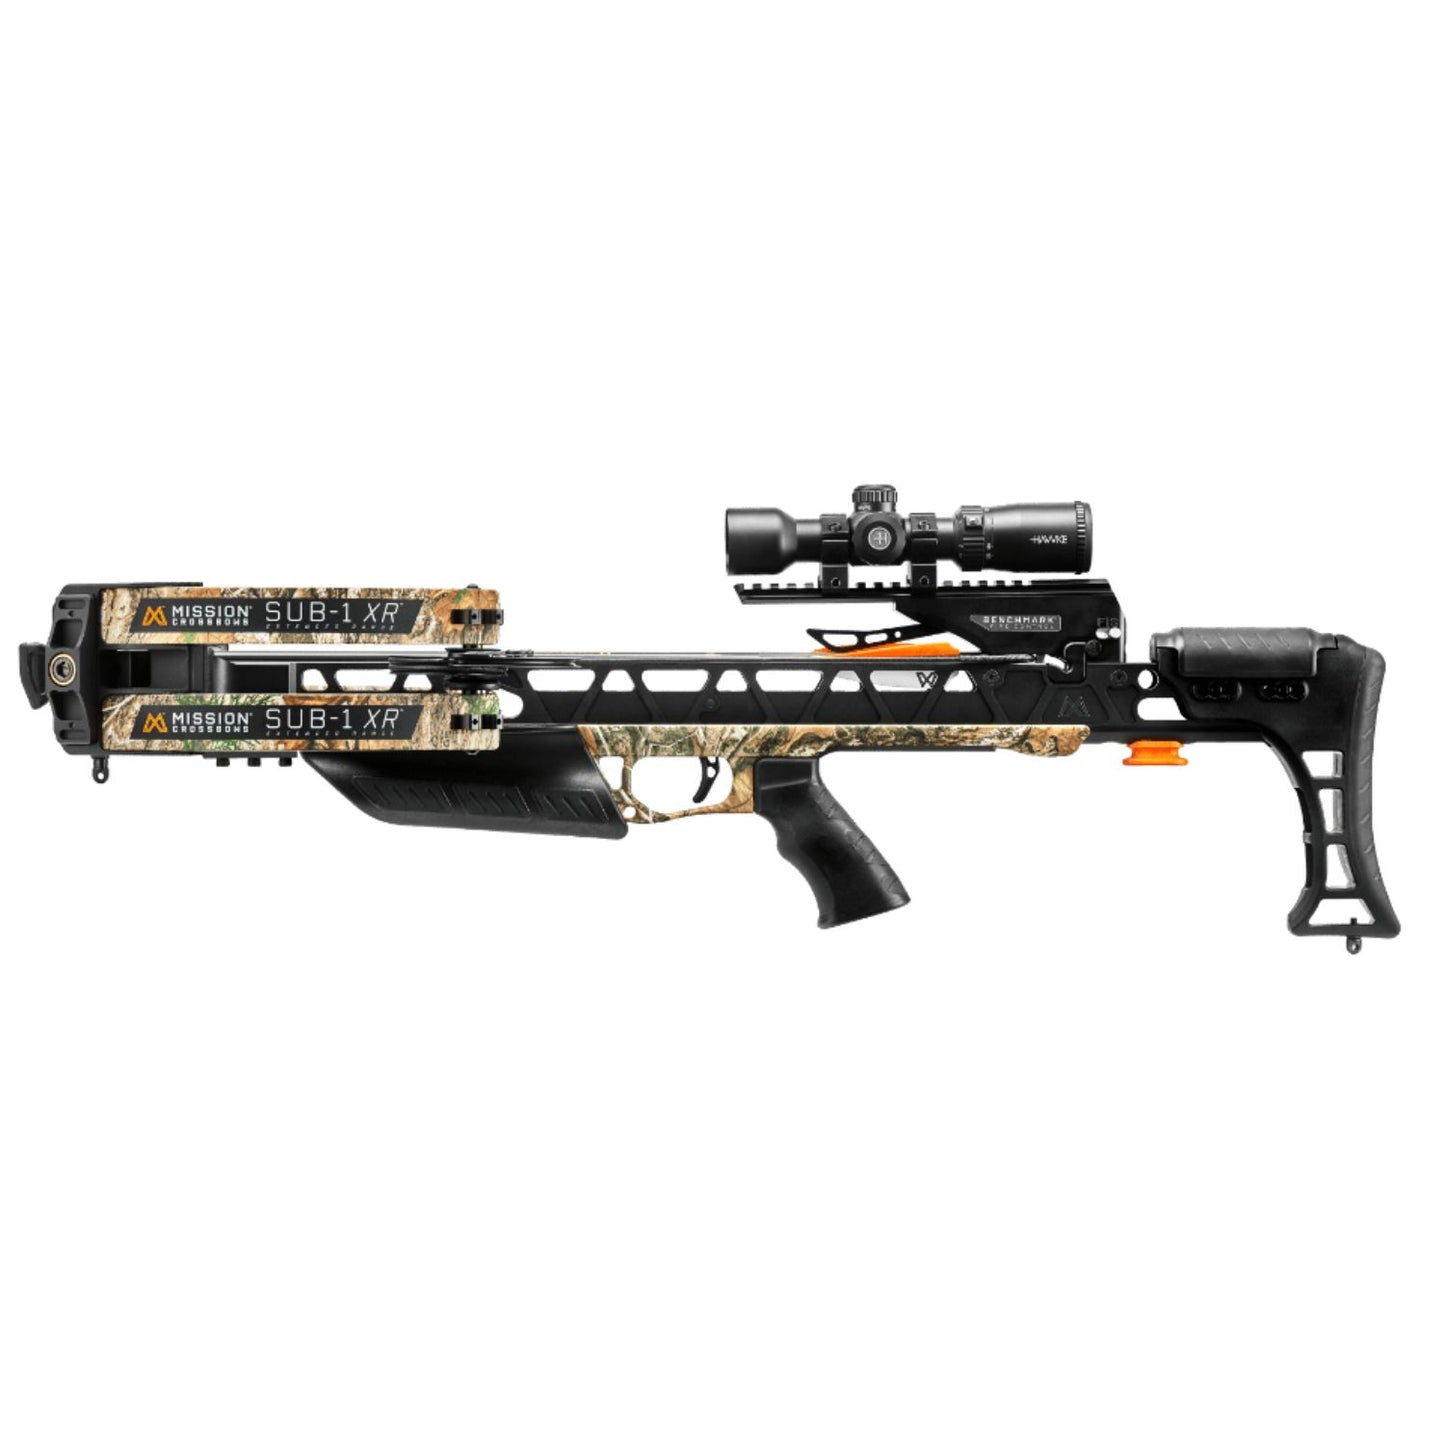 Mission Sub 1 XR Pro Crossbow Package